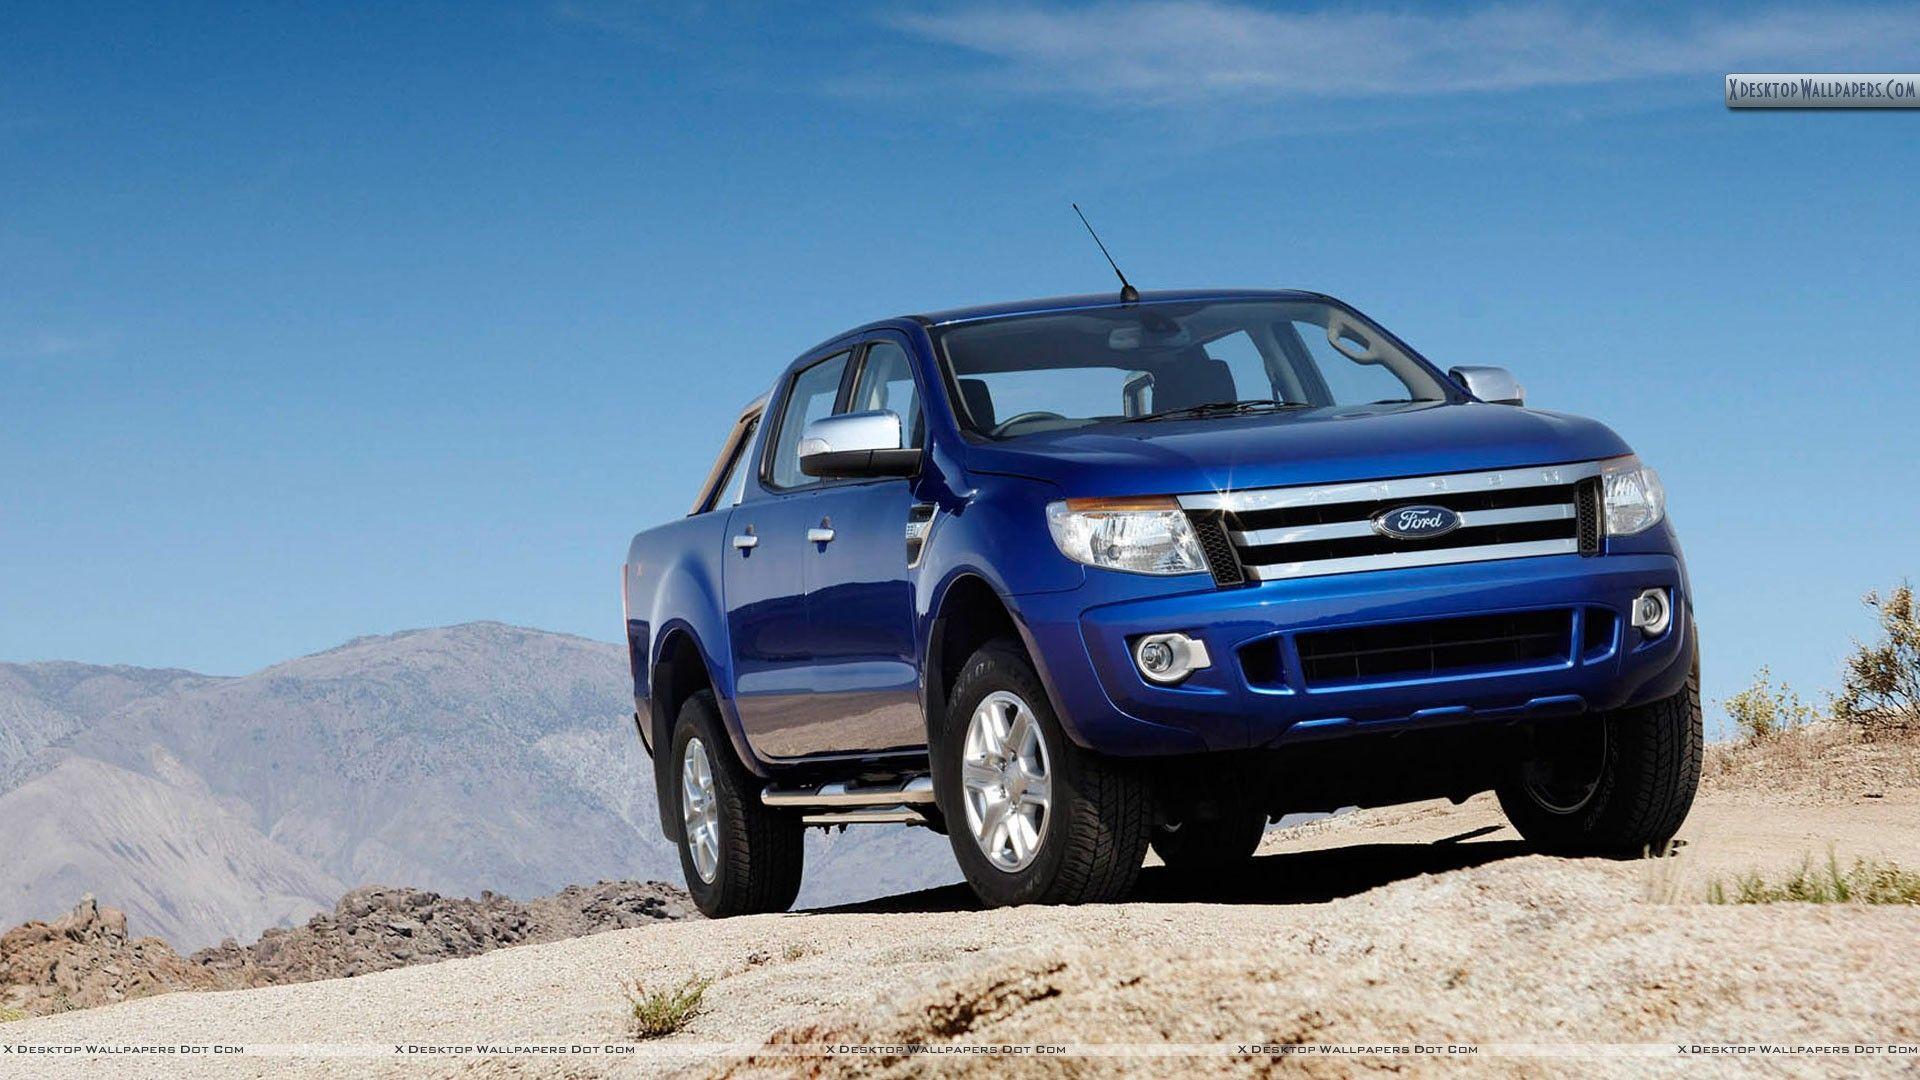 Ford Ranger Wallpaper, Photo & Image in HD